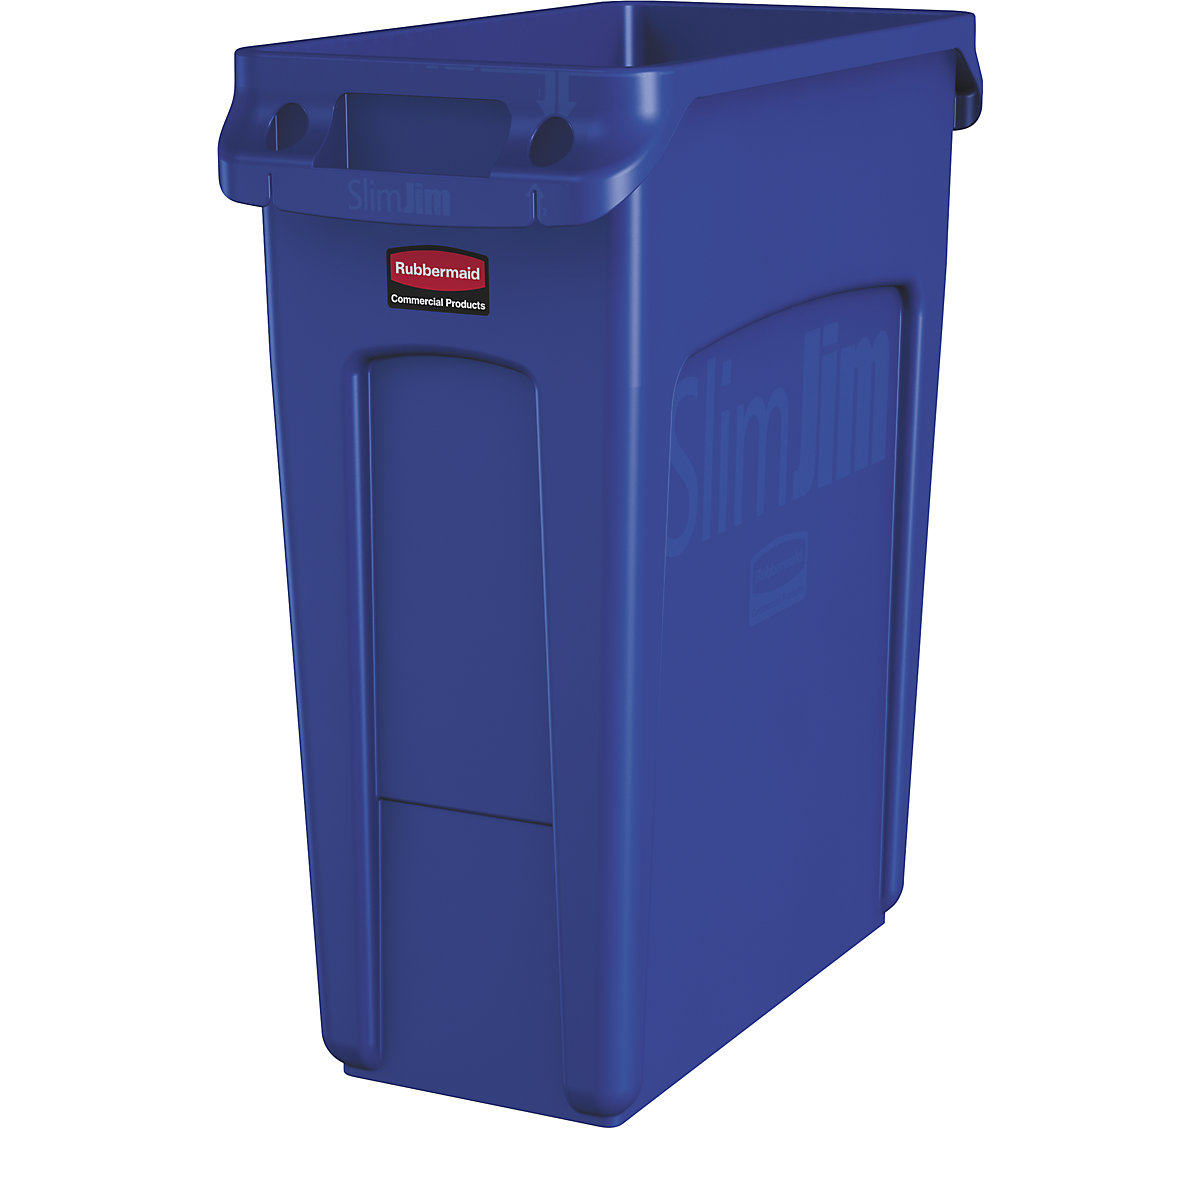 SLIM JIM® recyclable waste collector/waste bin – Rubbermaid, capacity 60 l, with ventilation ducts, blue, 3+ items-10